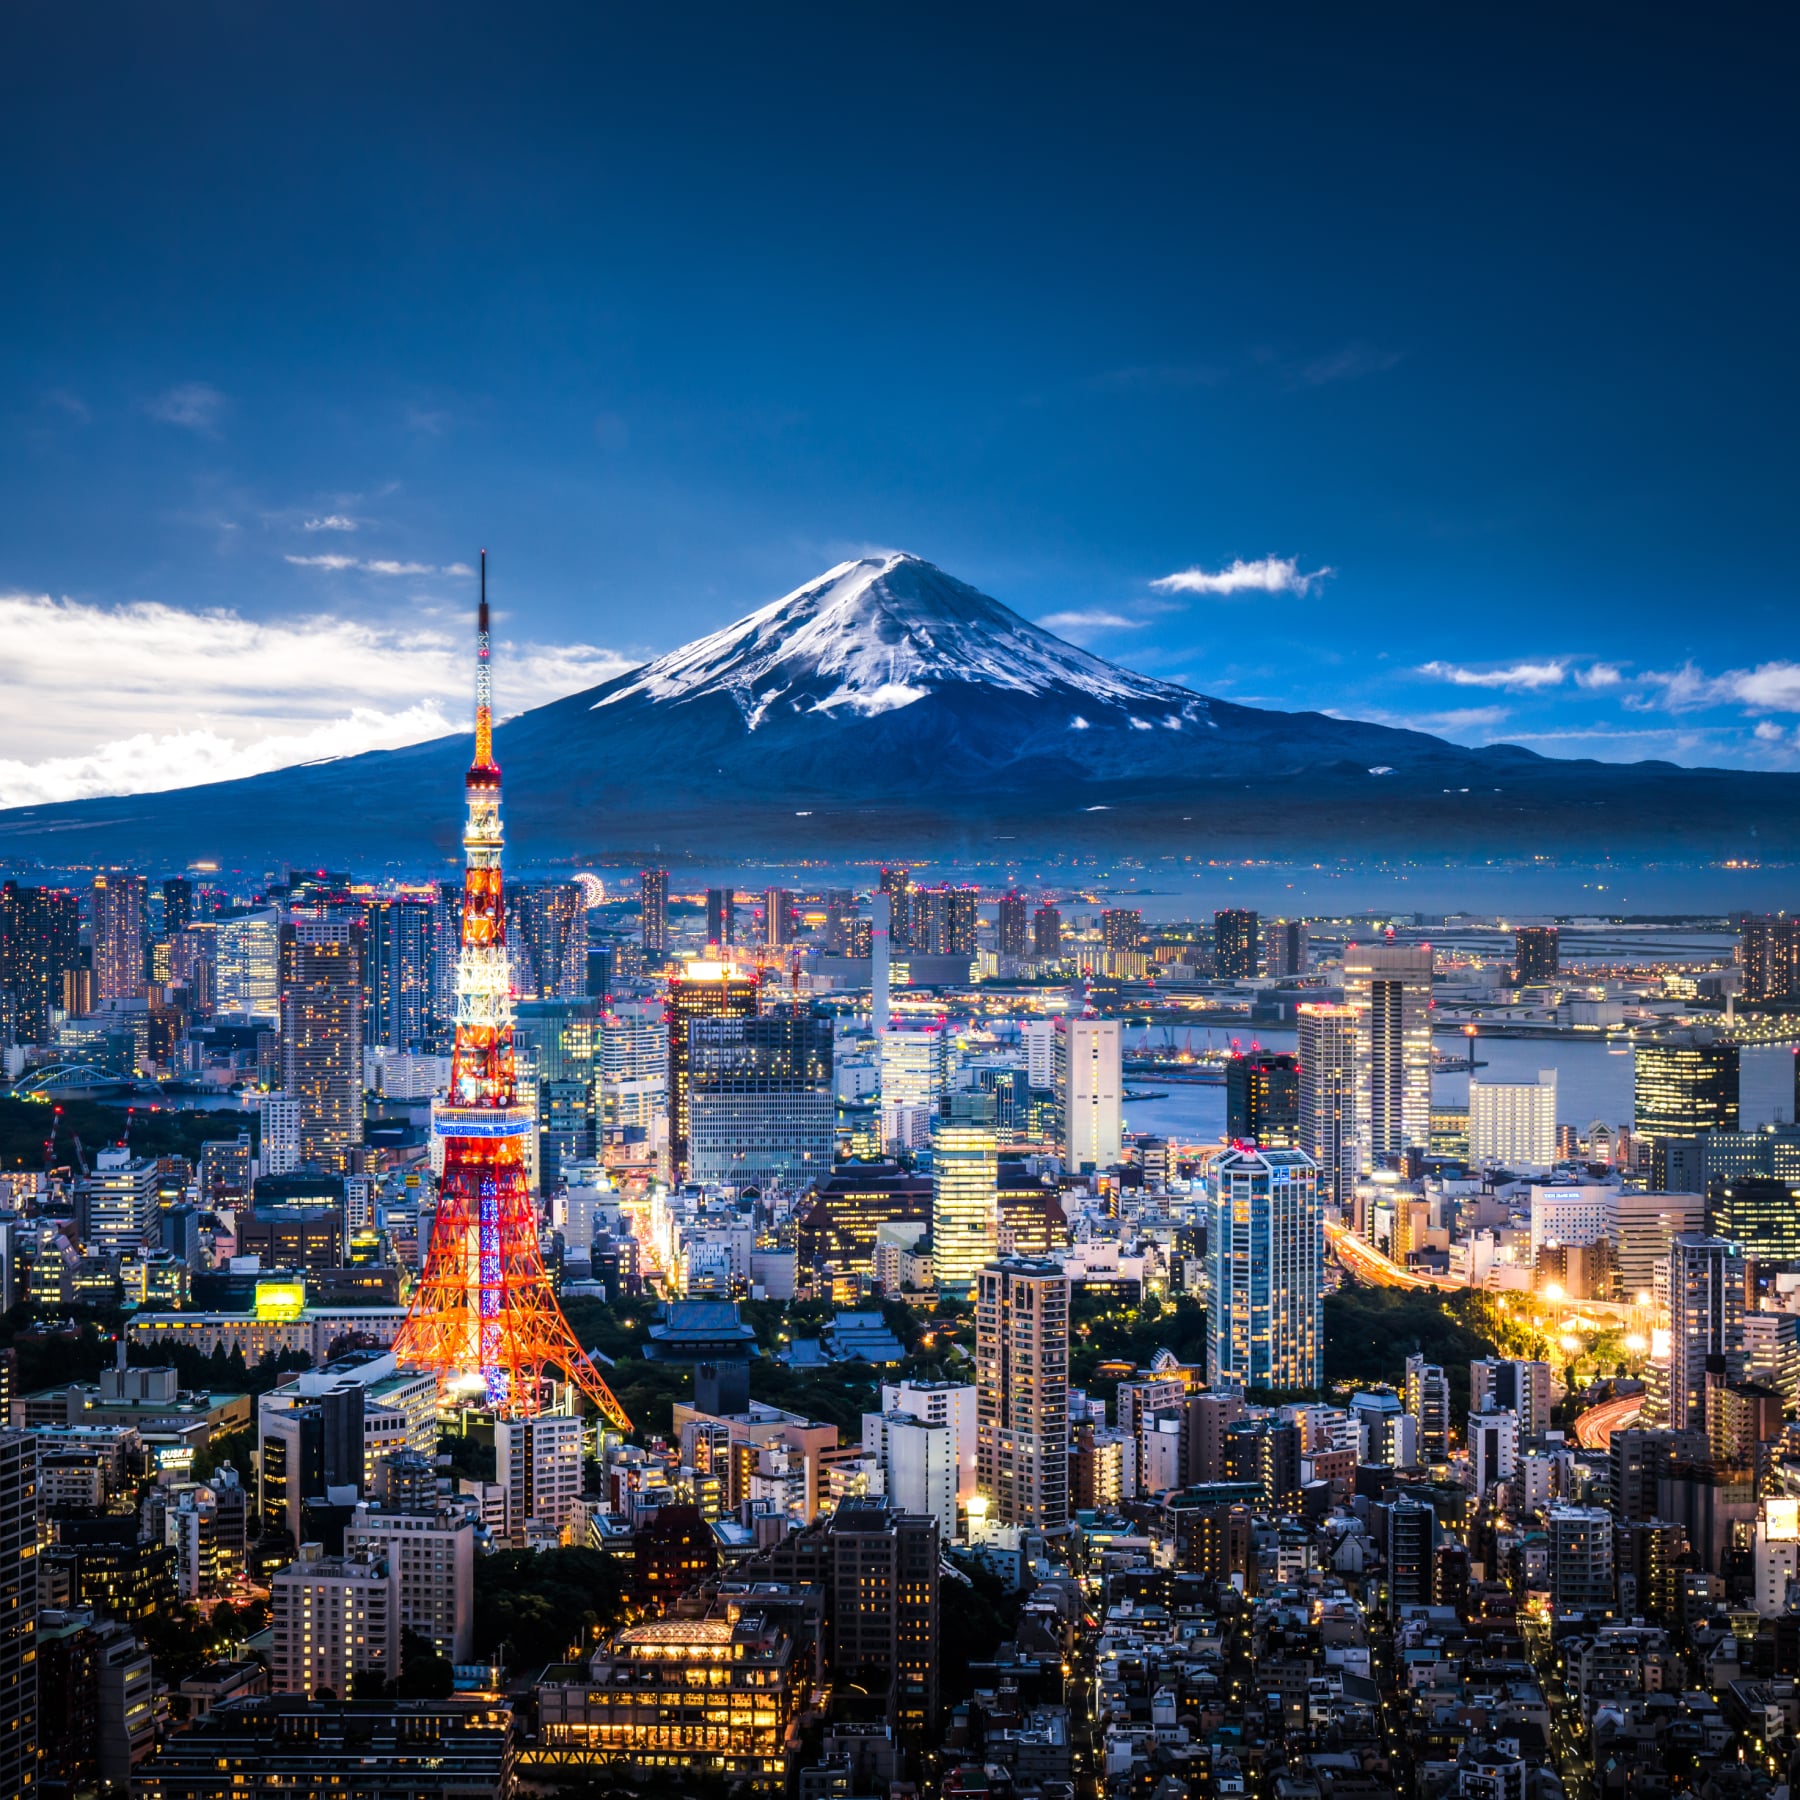 Tokyo is one of the best travel destinations in literature